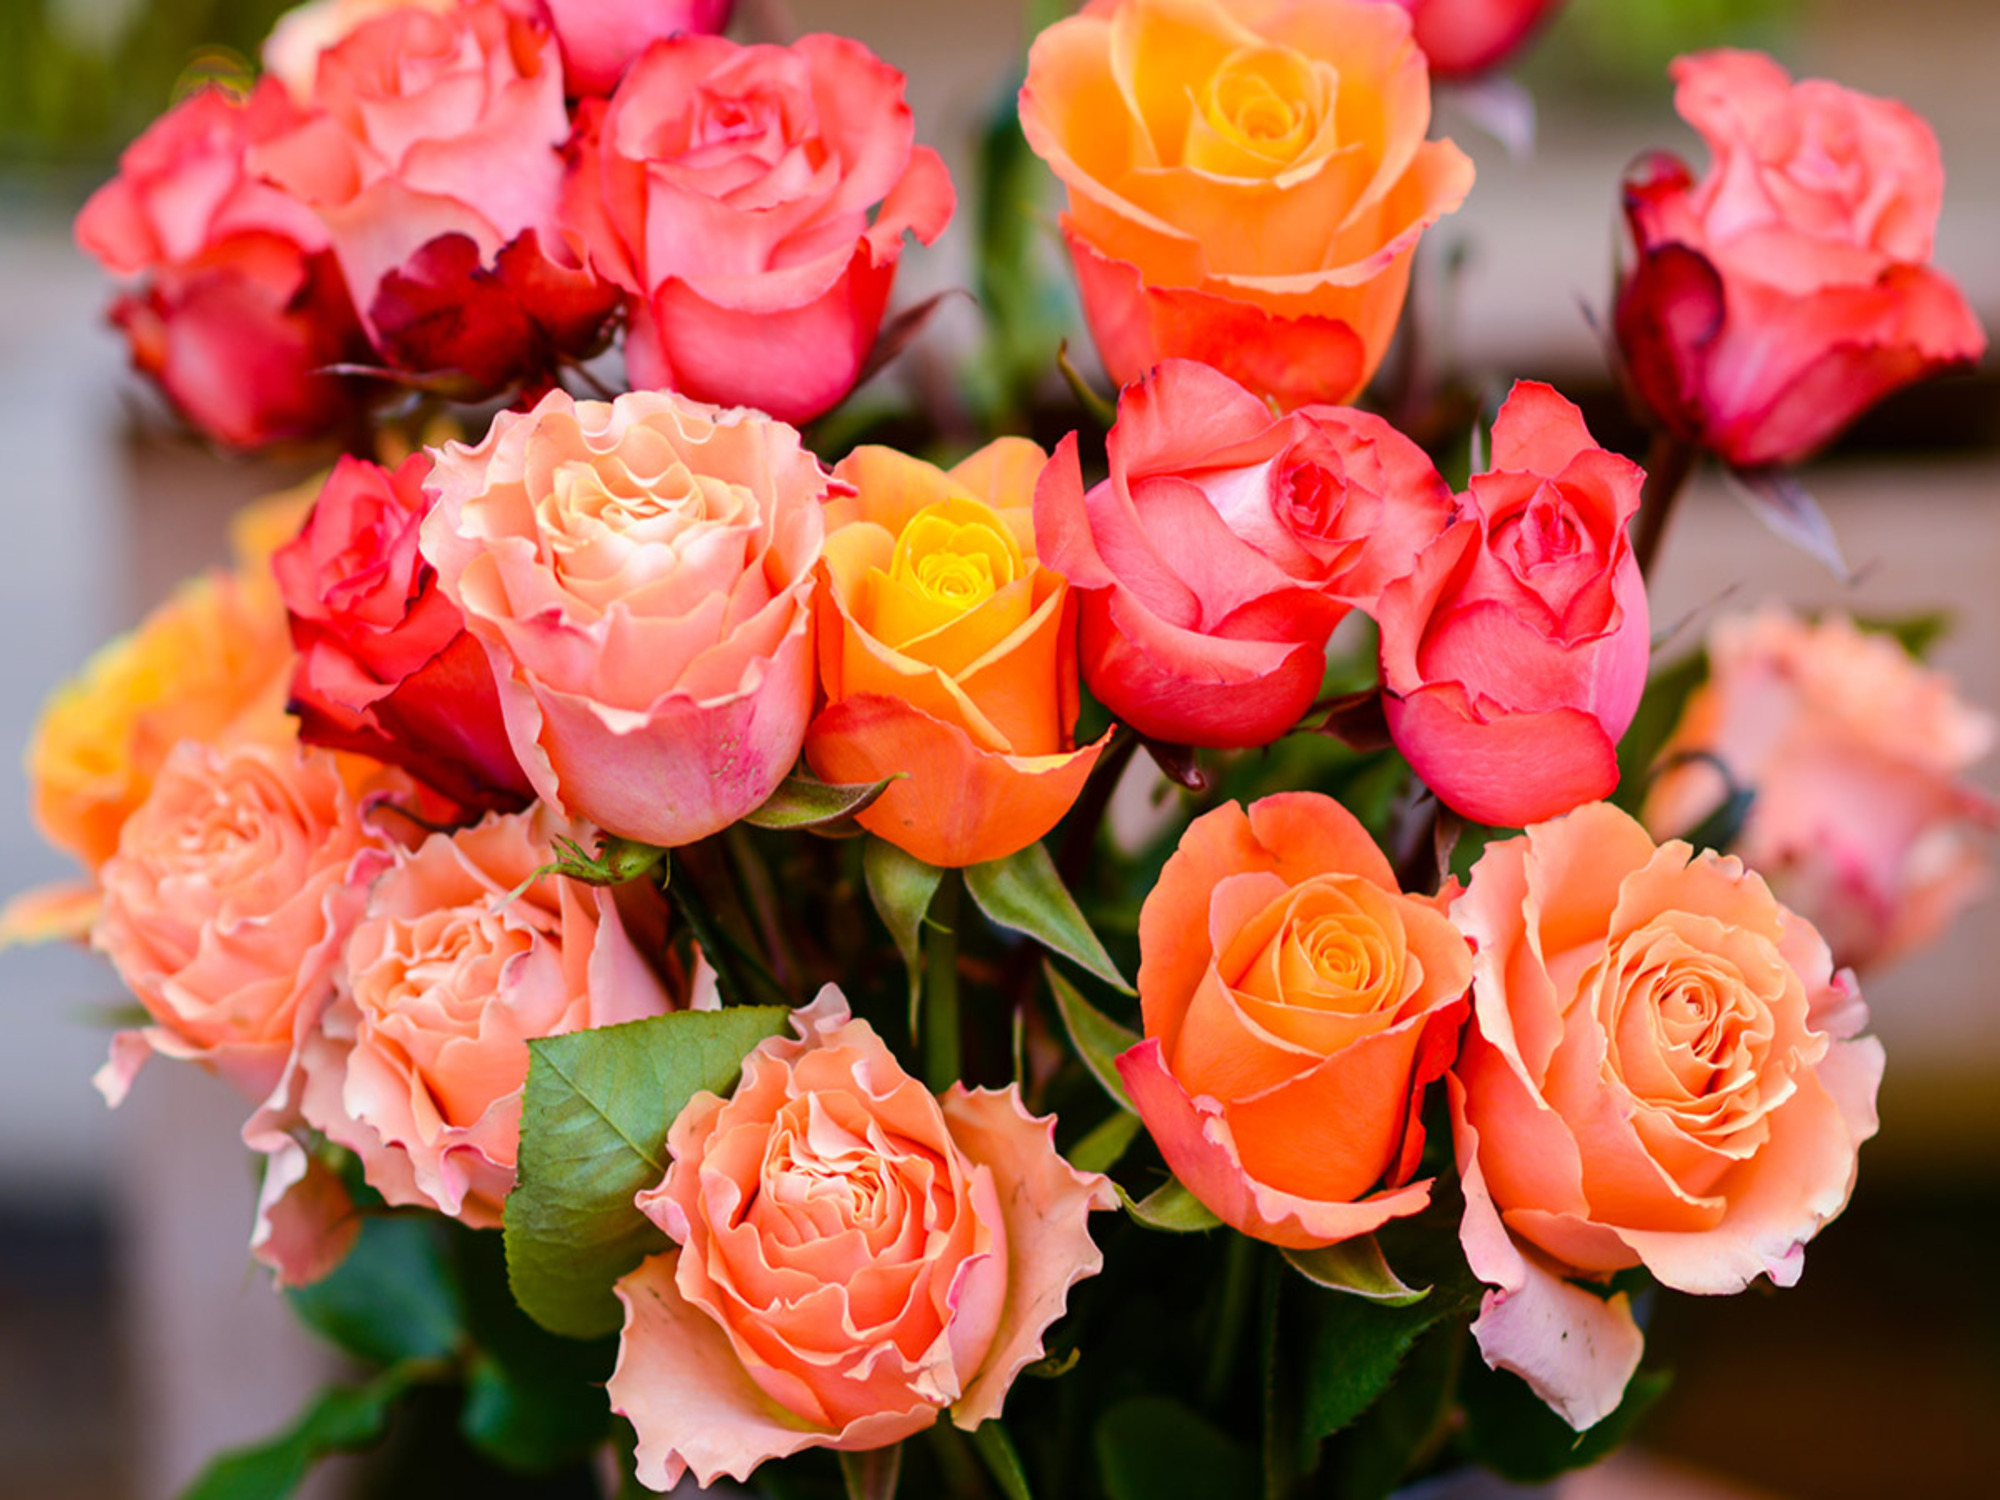 Handpicked, farm-fresh rose bouquet for Mother’s Day, just $45 shipped